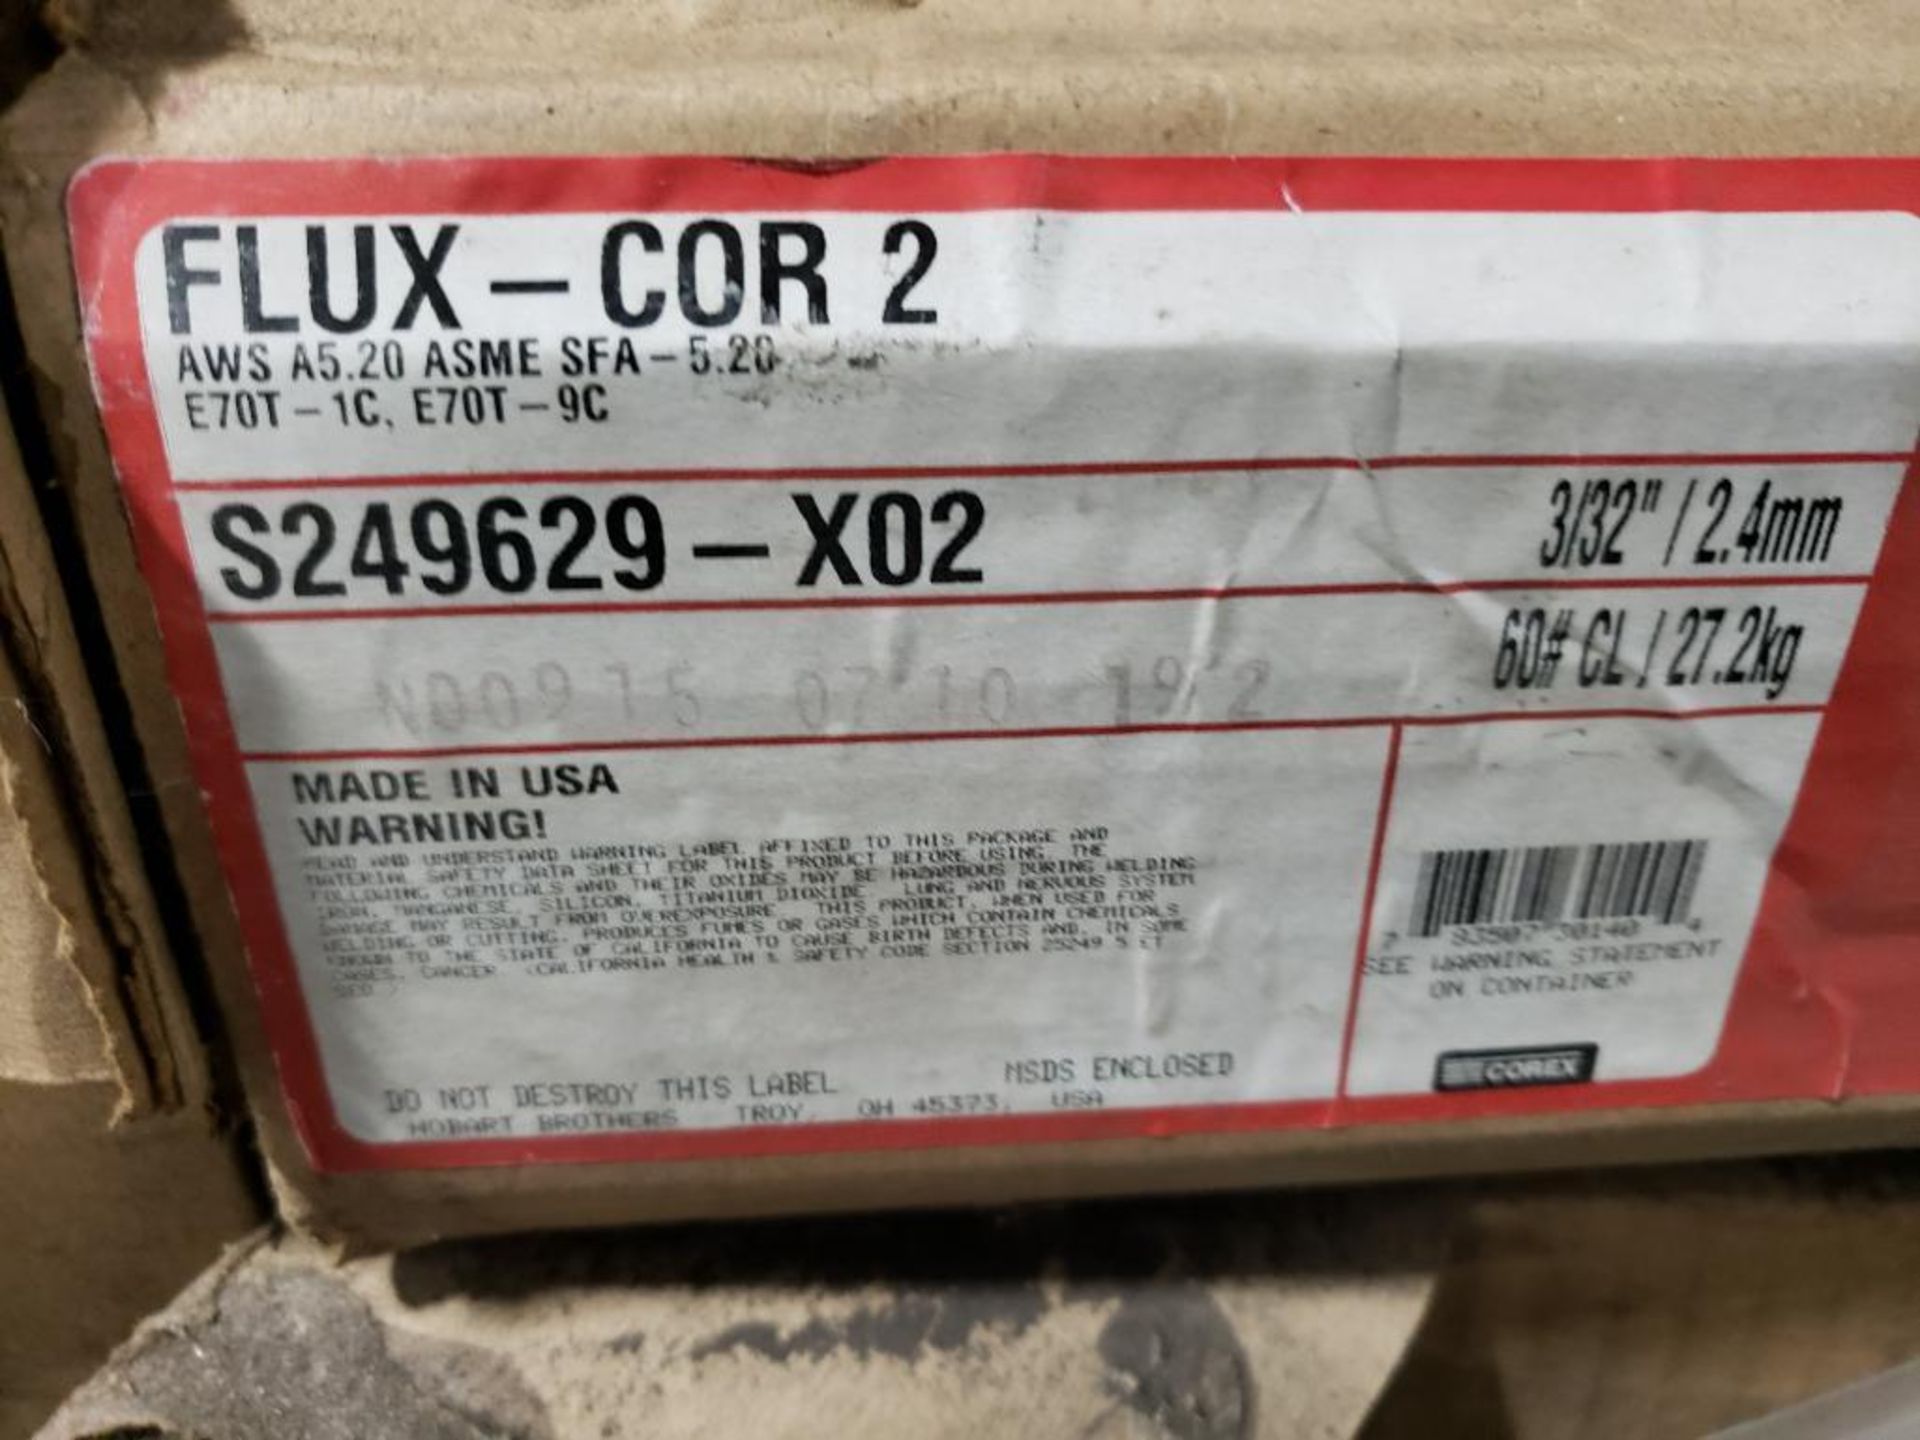 Qty 960lbs - Corex welding wire. Flux-Cor 2, 3/32in. Part number S249629-X02. (16 rolls of 60lbs ea) - Image 4 of 4